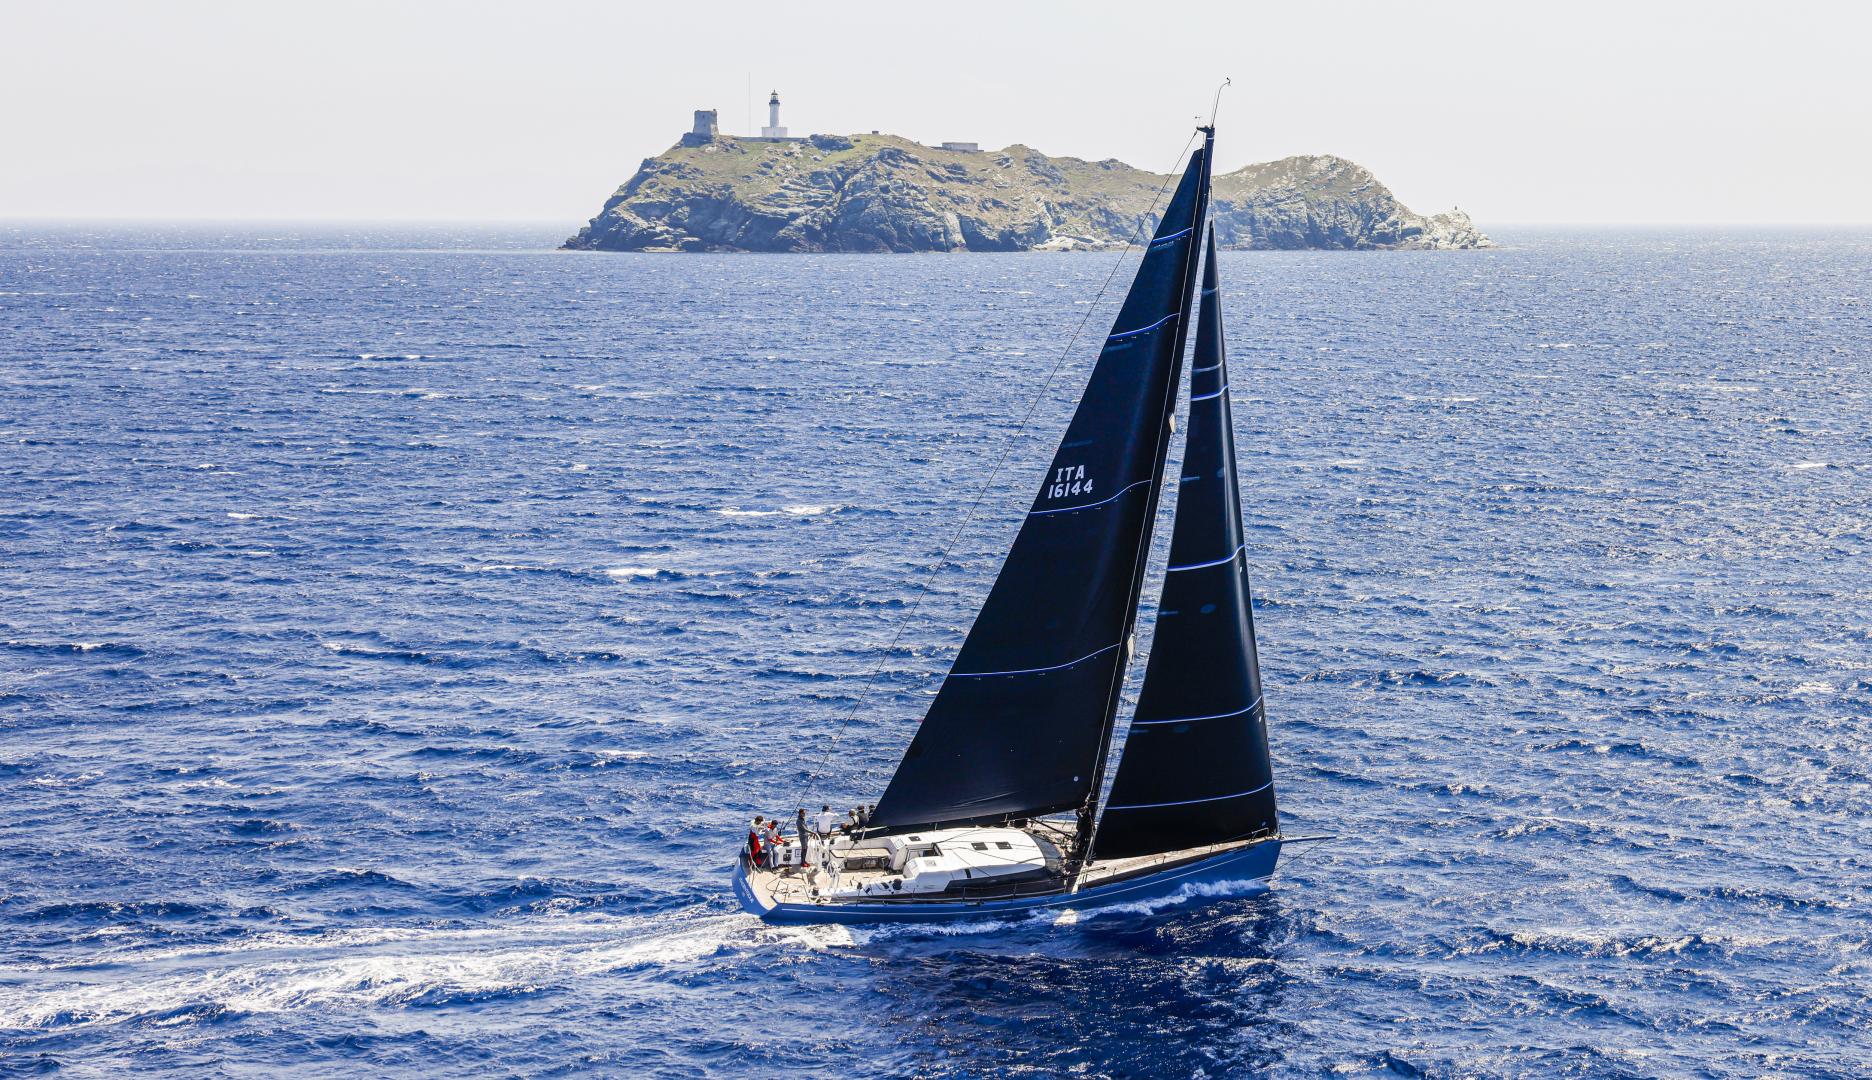 Itacentodue still hard on the wind to the Giraglia Rock en route to IRC 0 maxi yacht victory. Photo: ROLEX / Studio Borlenghi